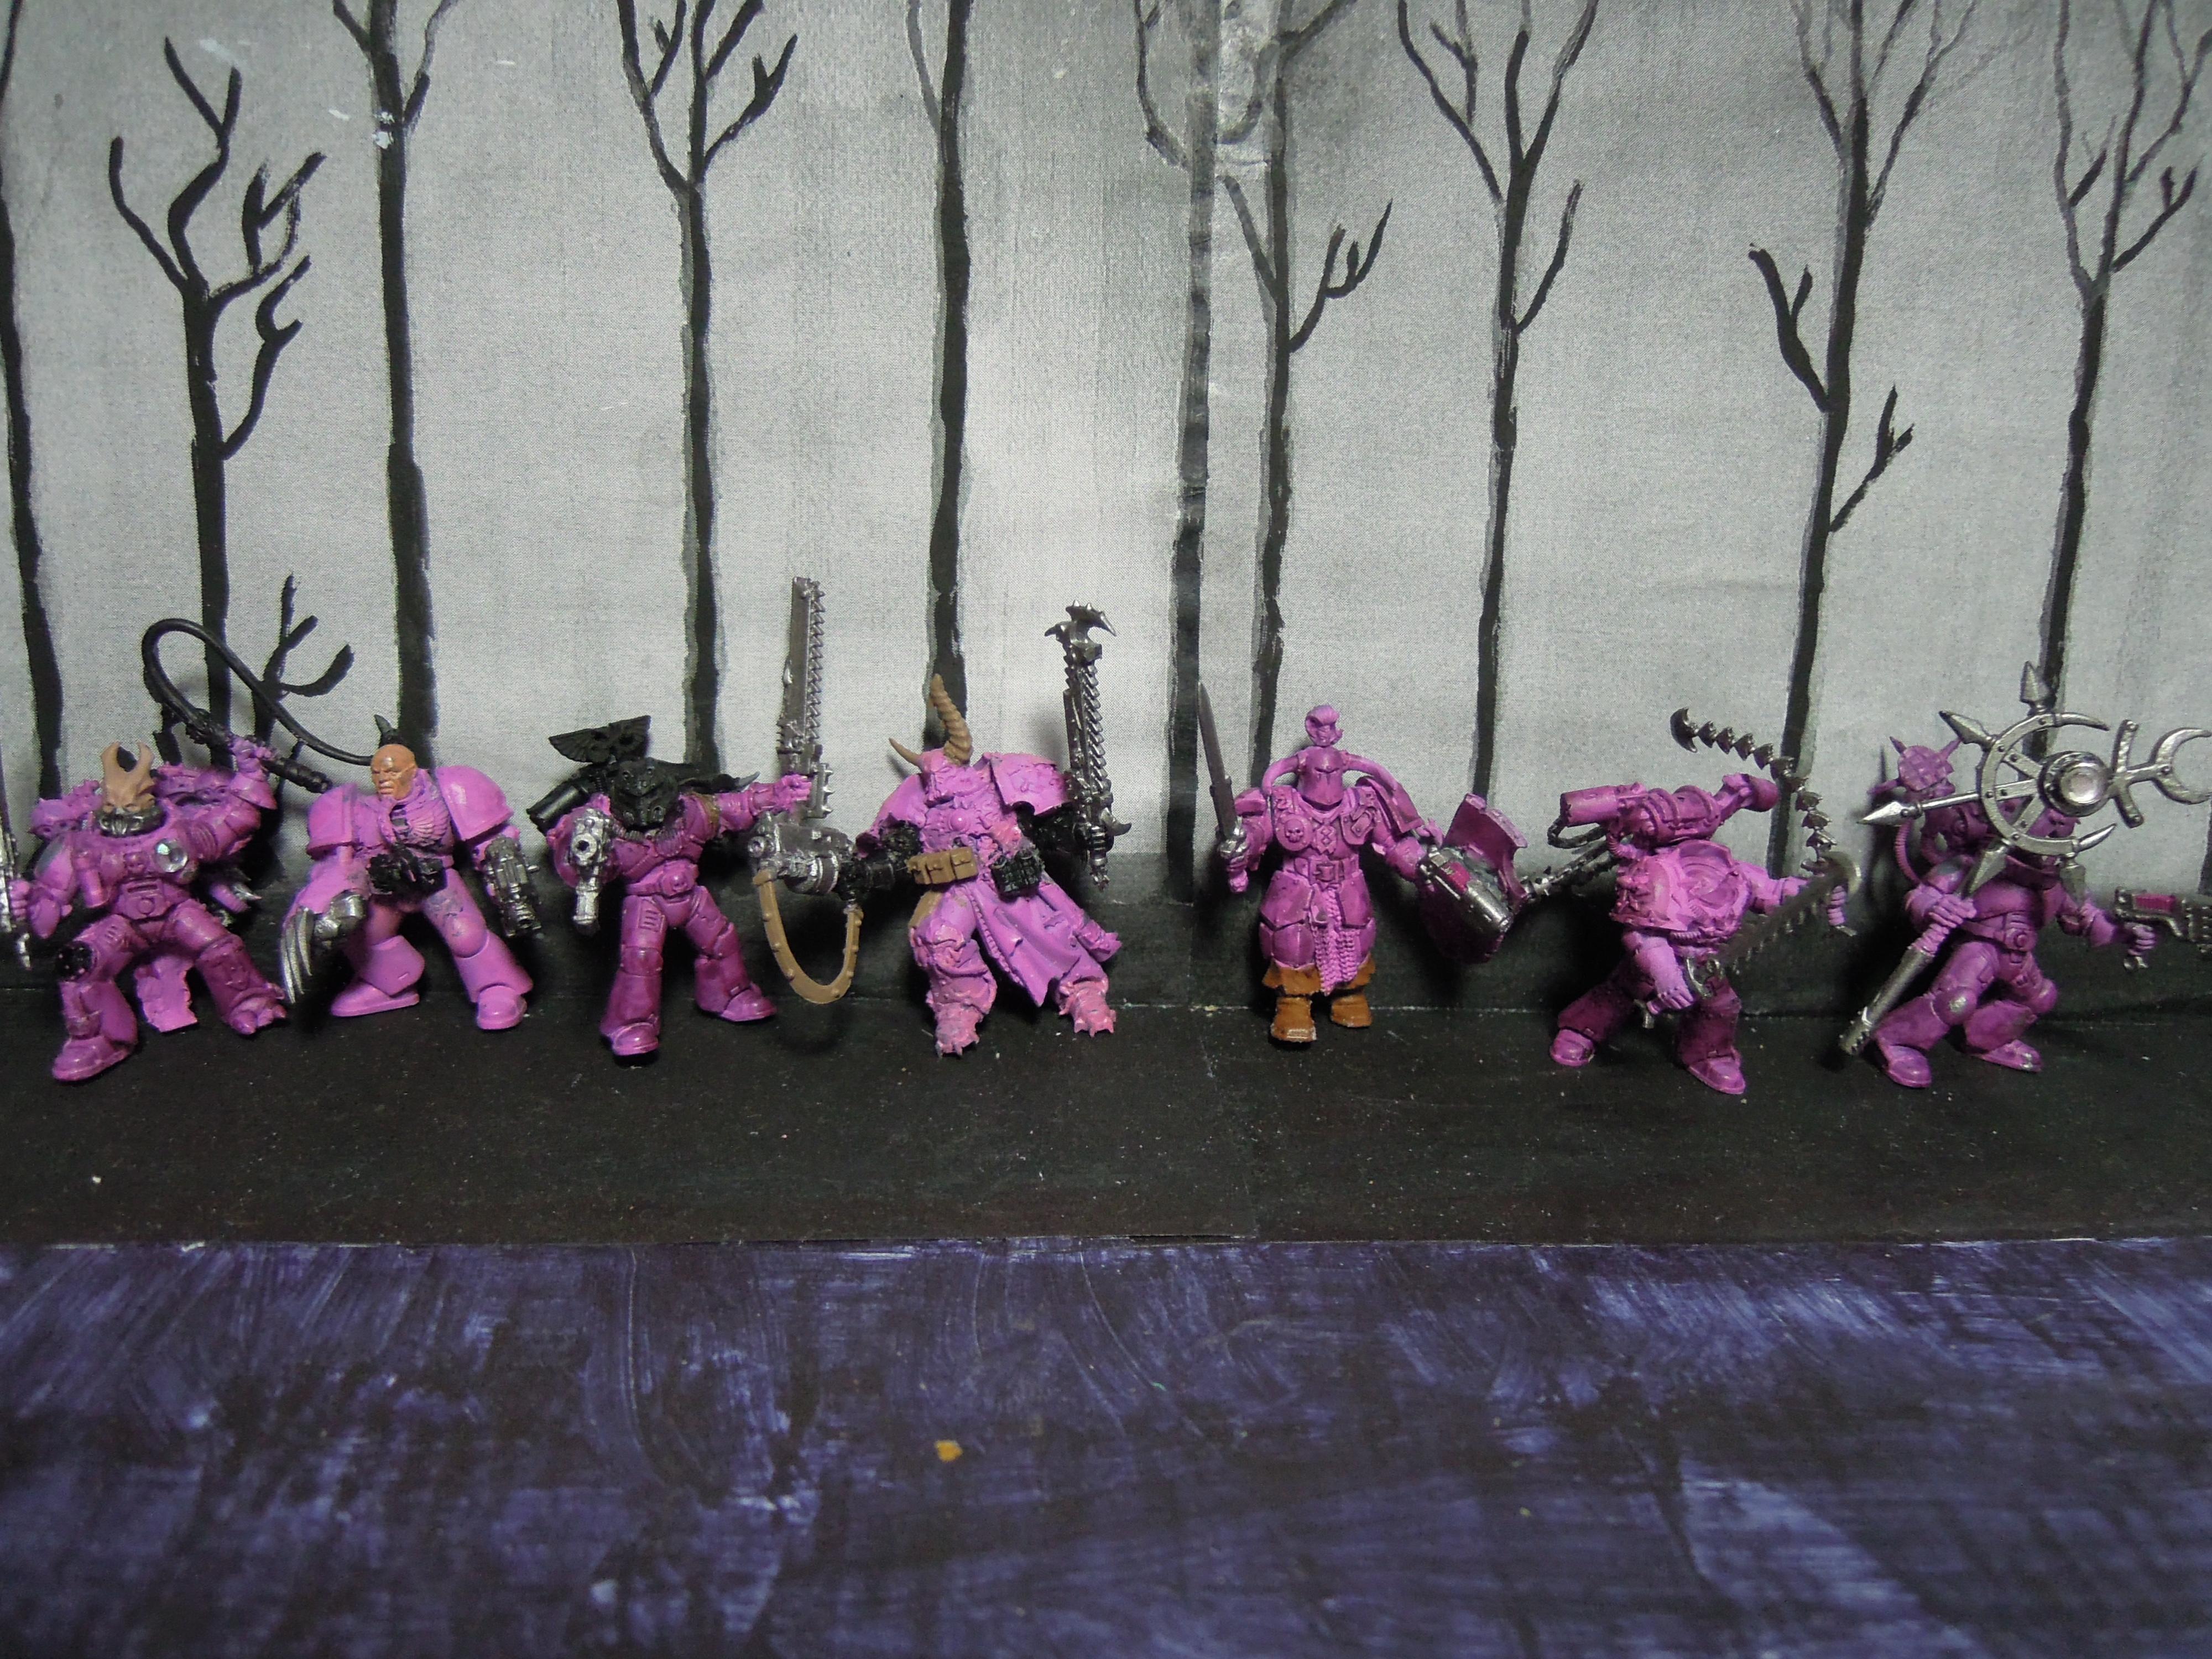 Chaos, Chaos Space Marines, Conversion, Emperor's Children, Heresy, Heretic Astartes, Infantry, Kitbash, Perfection Or Death, Regiment, Slaanesh, Traitor Legions, Warhammer 40,000, Work In Progress